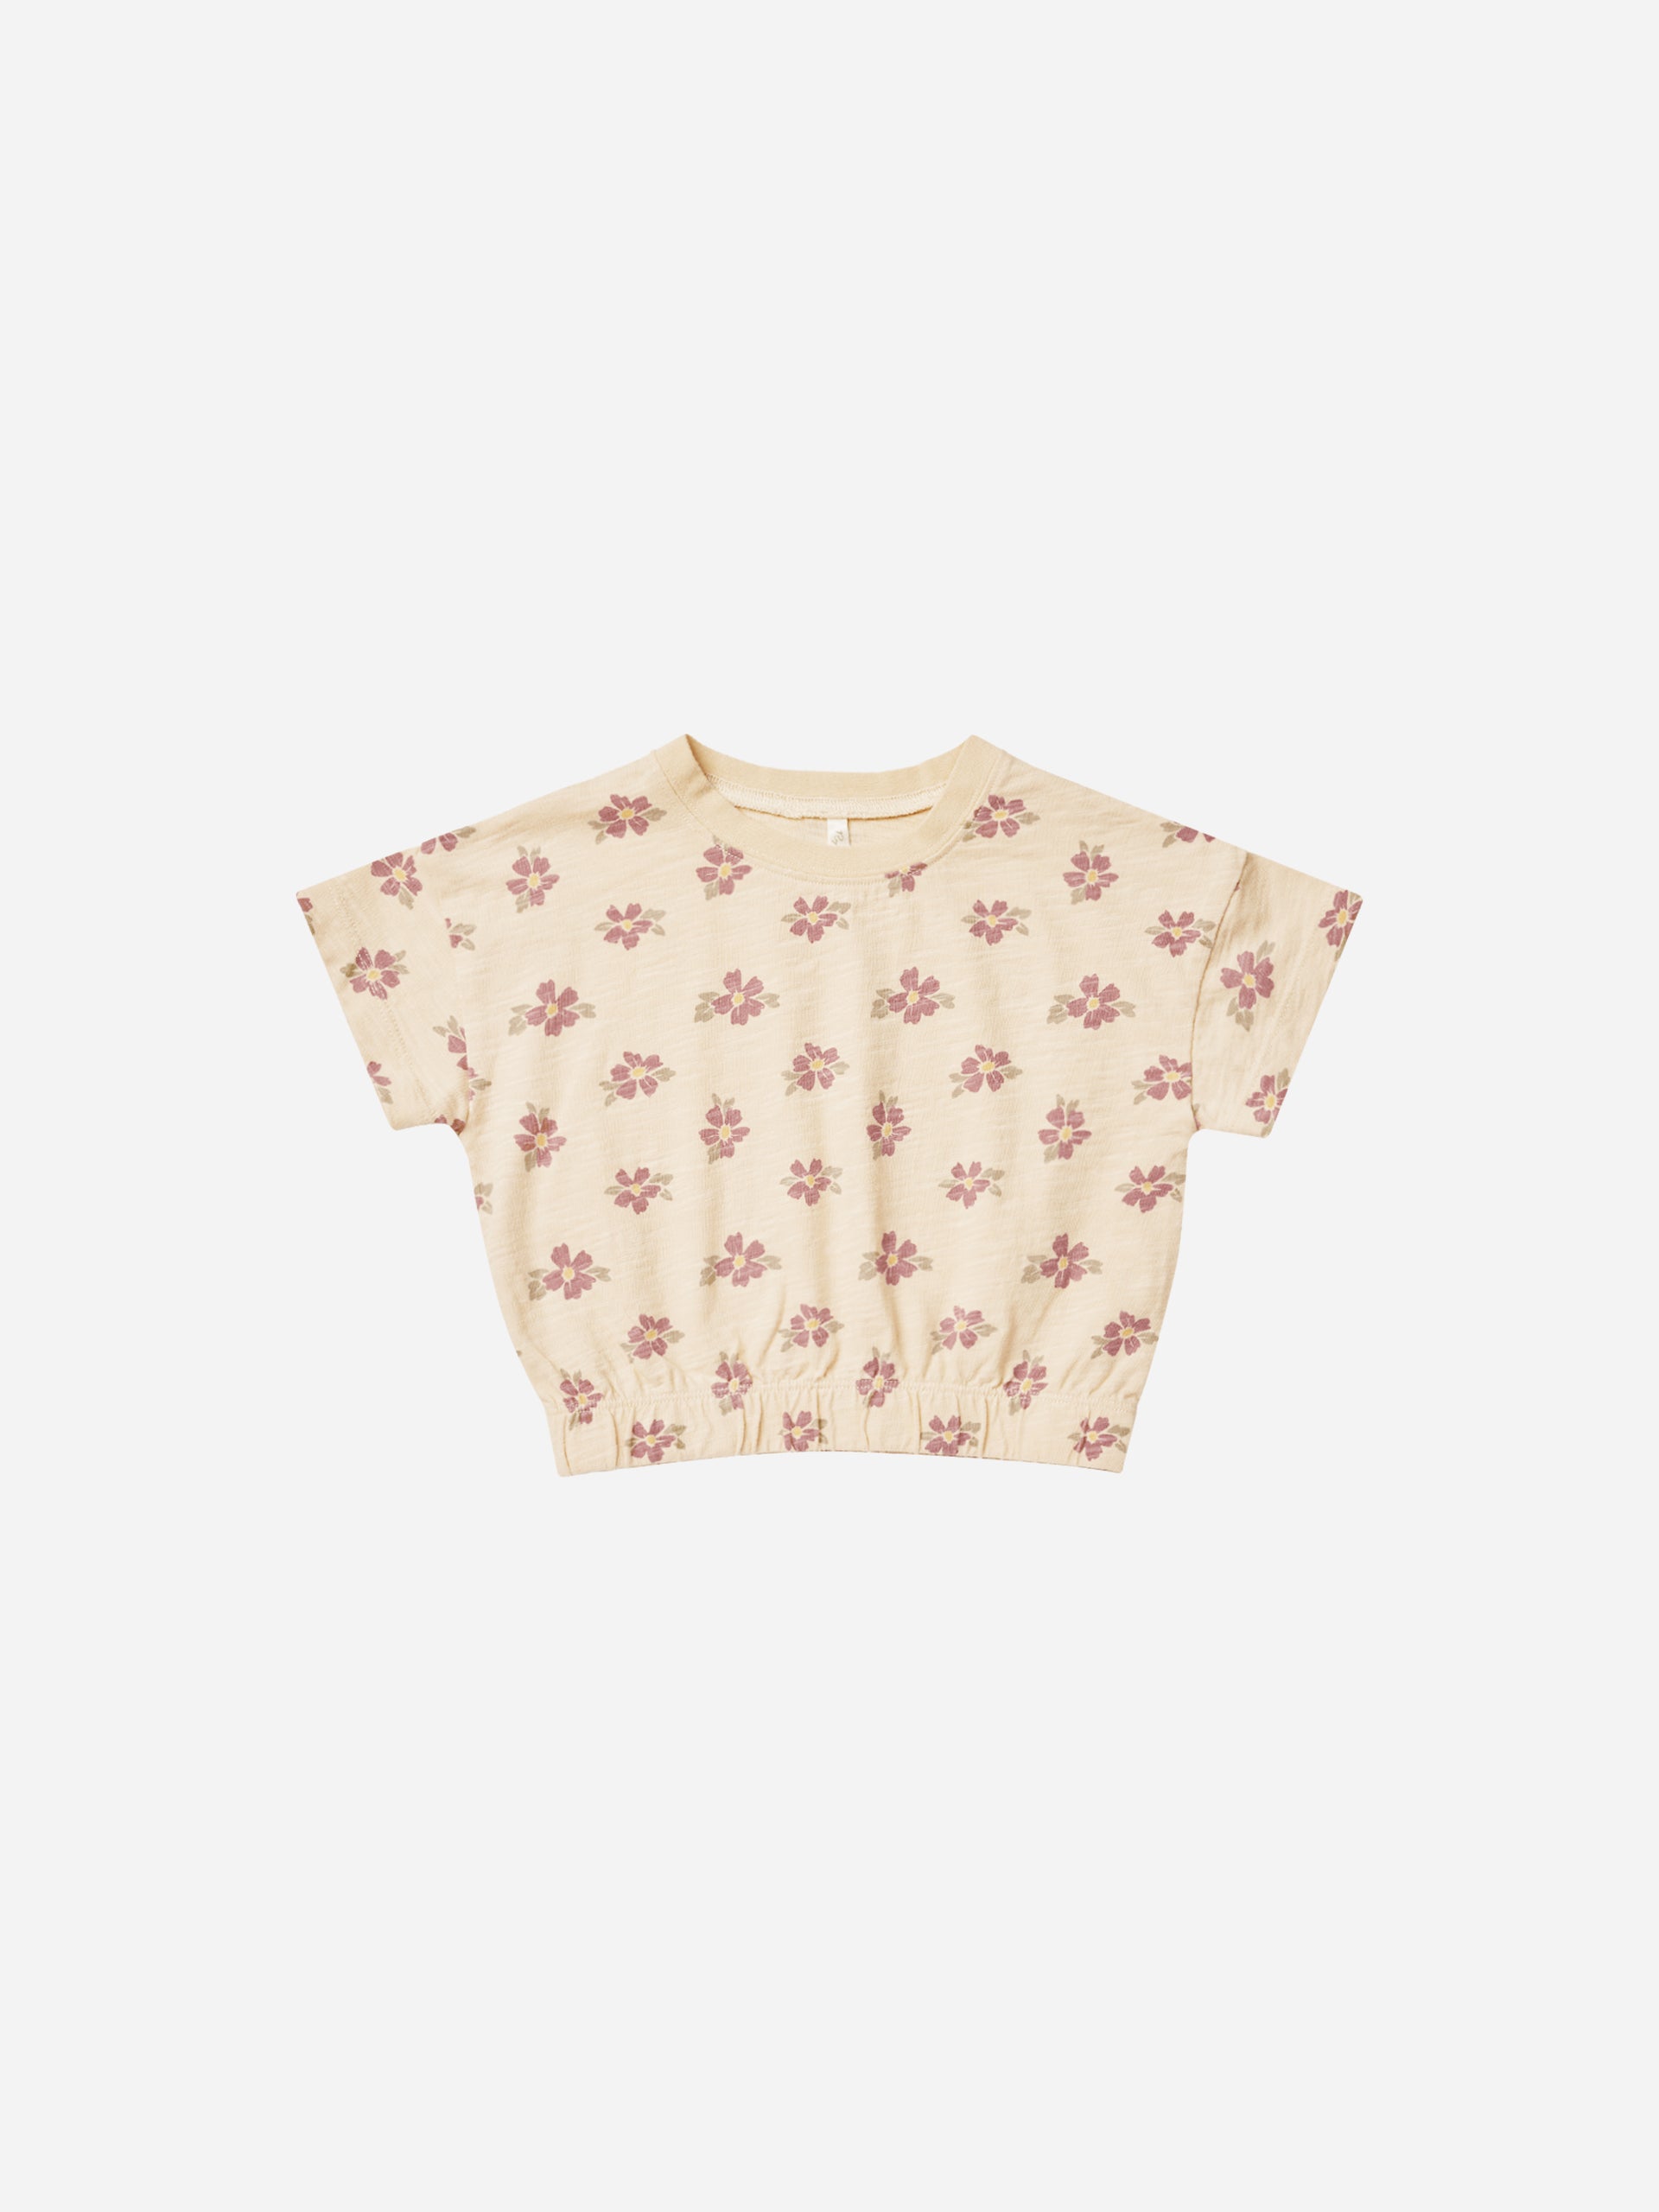 Cinched Tee || Kauai - Rylee + Cru | Kids Clothes | Trendy Baby Clothes | Modern Infant Outfits |